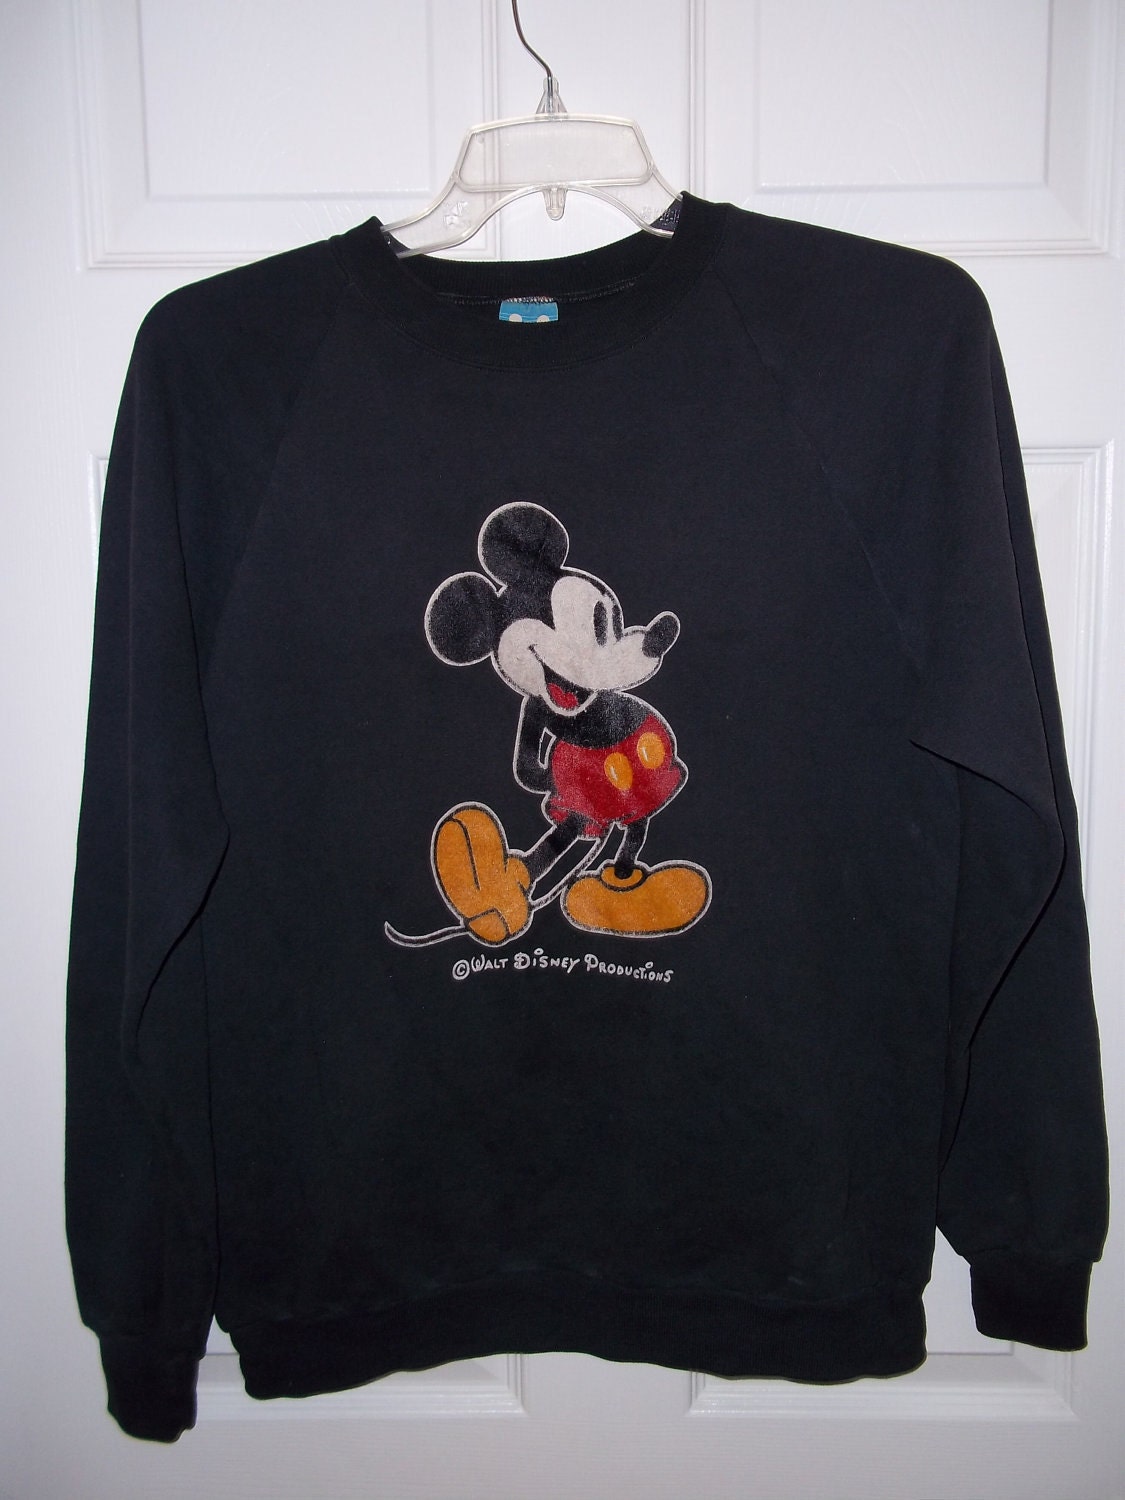 Items similar to Vintage black Mickey Mouse crew neck sweatshirt with ...